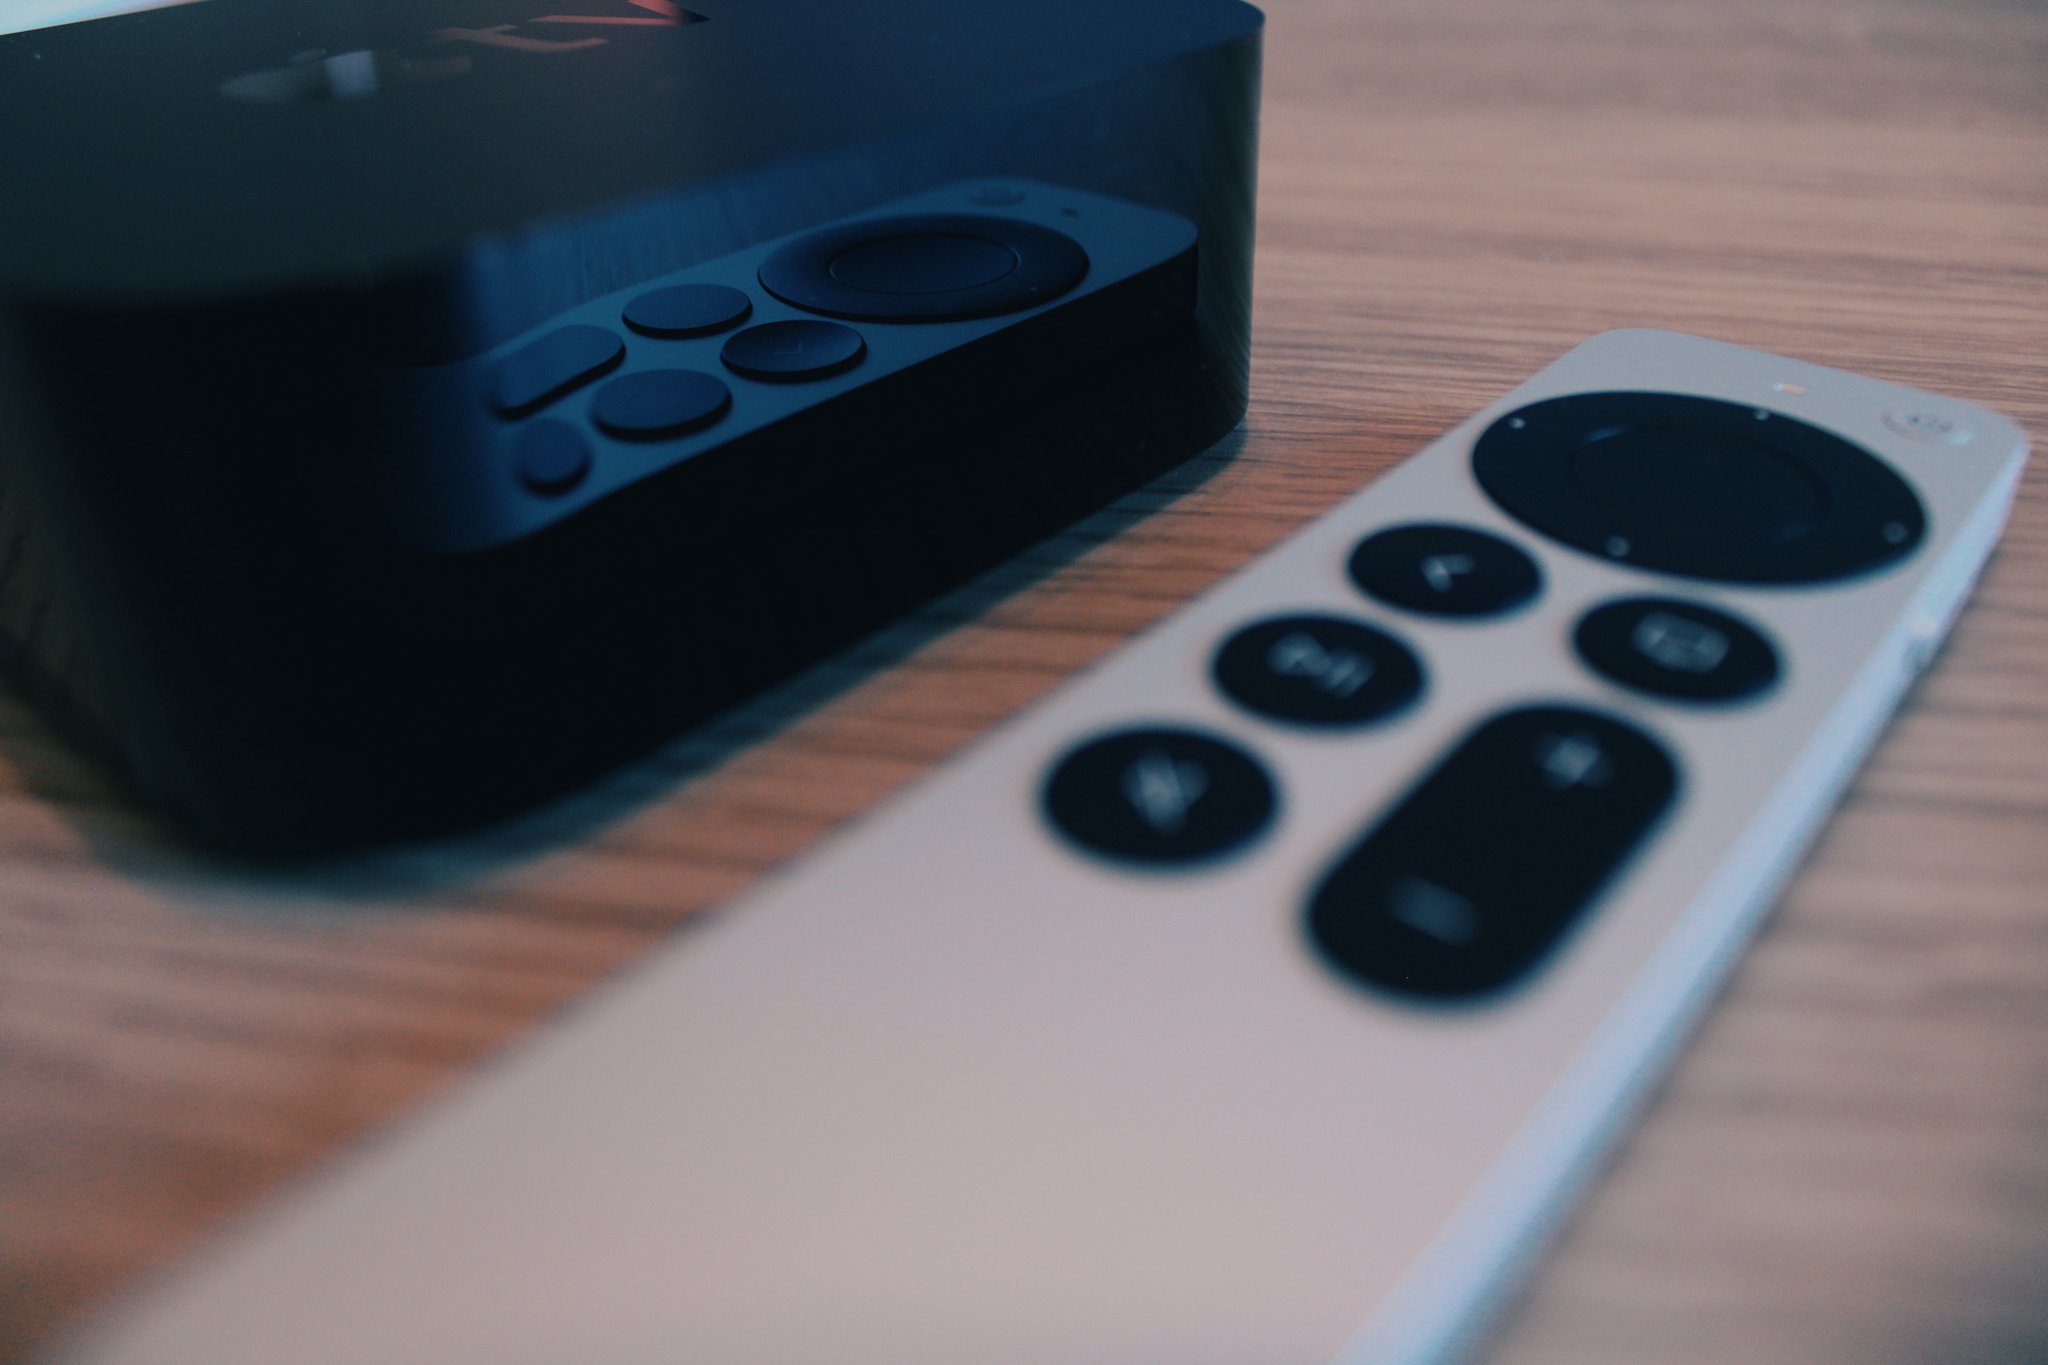 How control playback on Apple TV the Siri Remote |